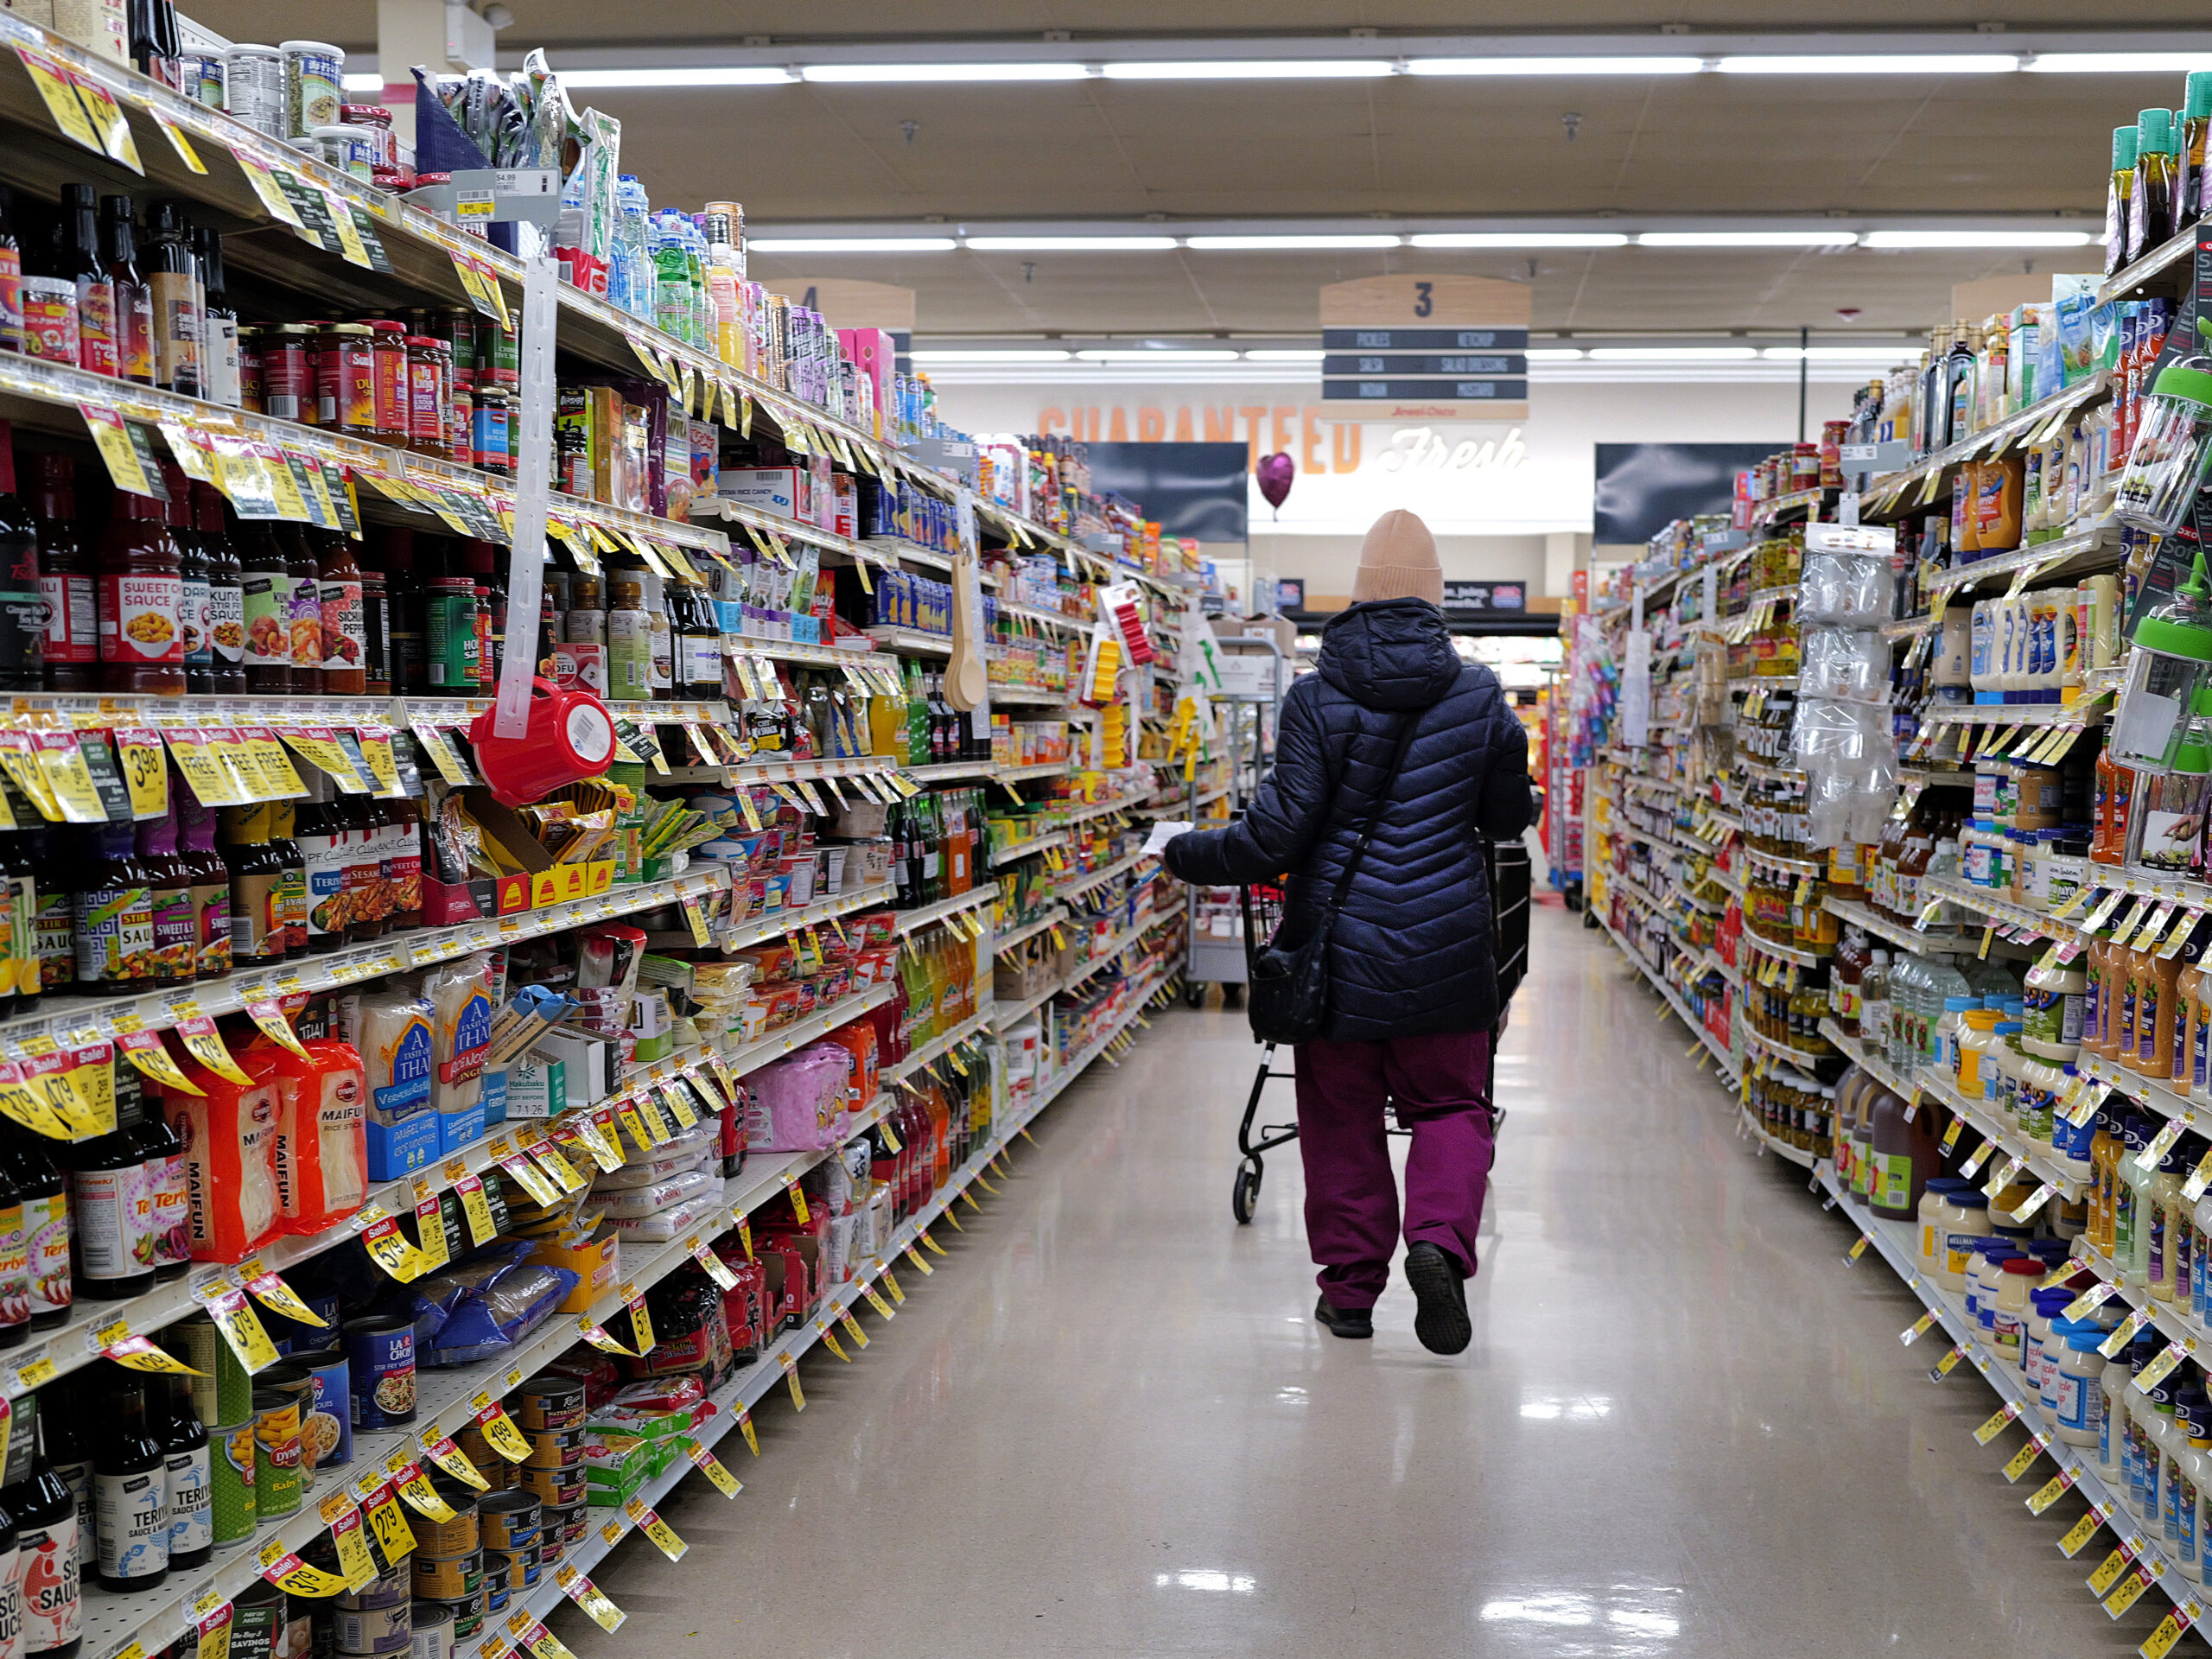 A report from Purdue University found that a majority of consumers expect food prices to keep rising in the coming year, which could sour voter sentiment.